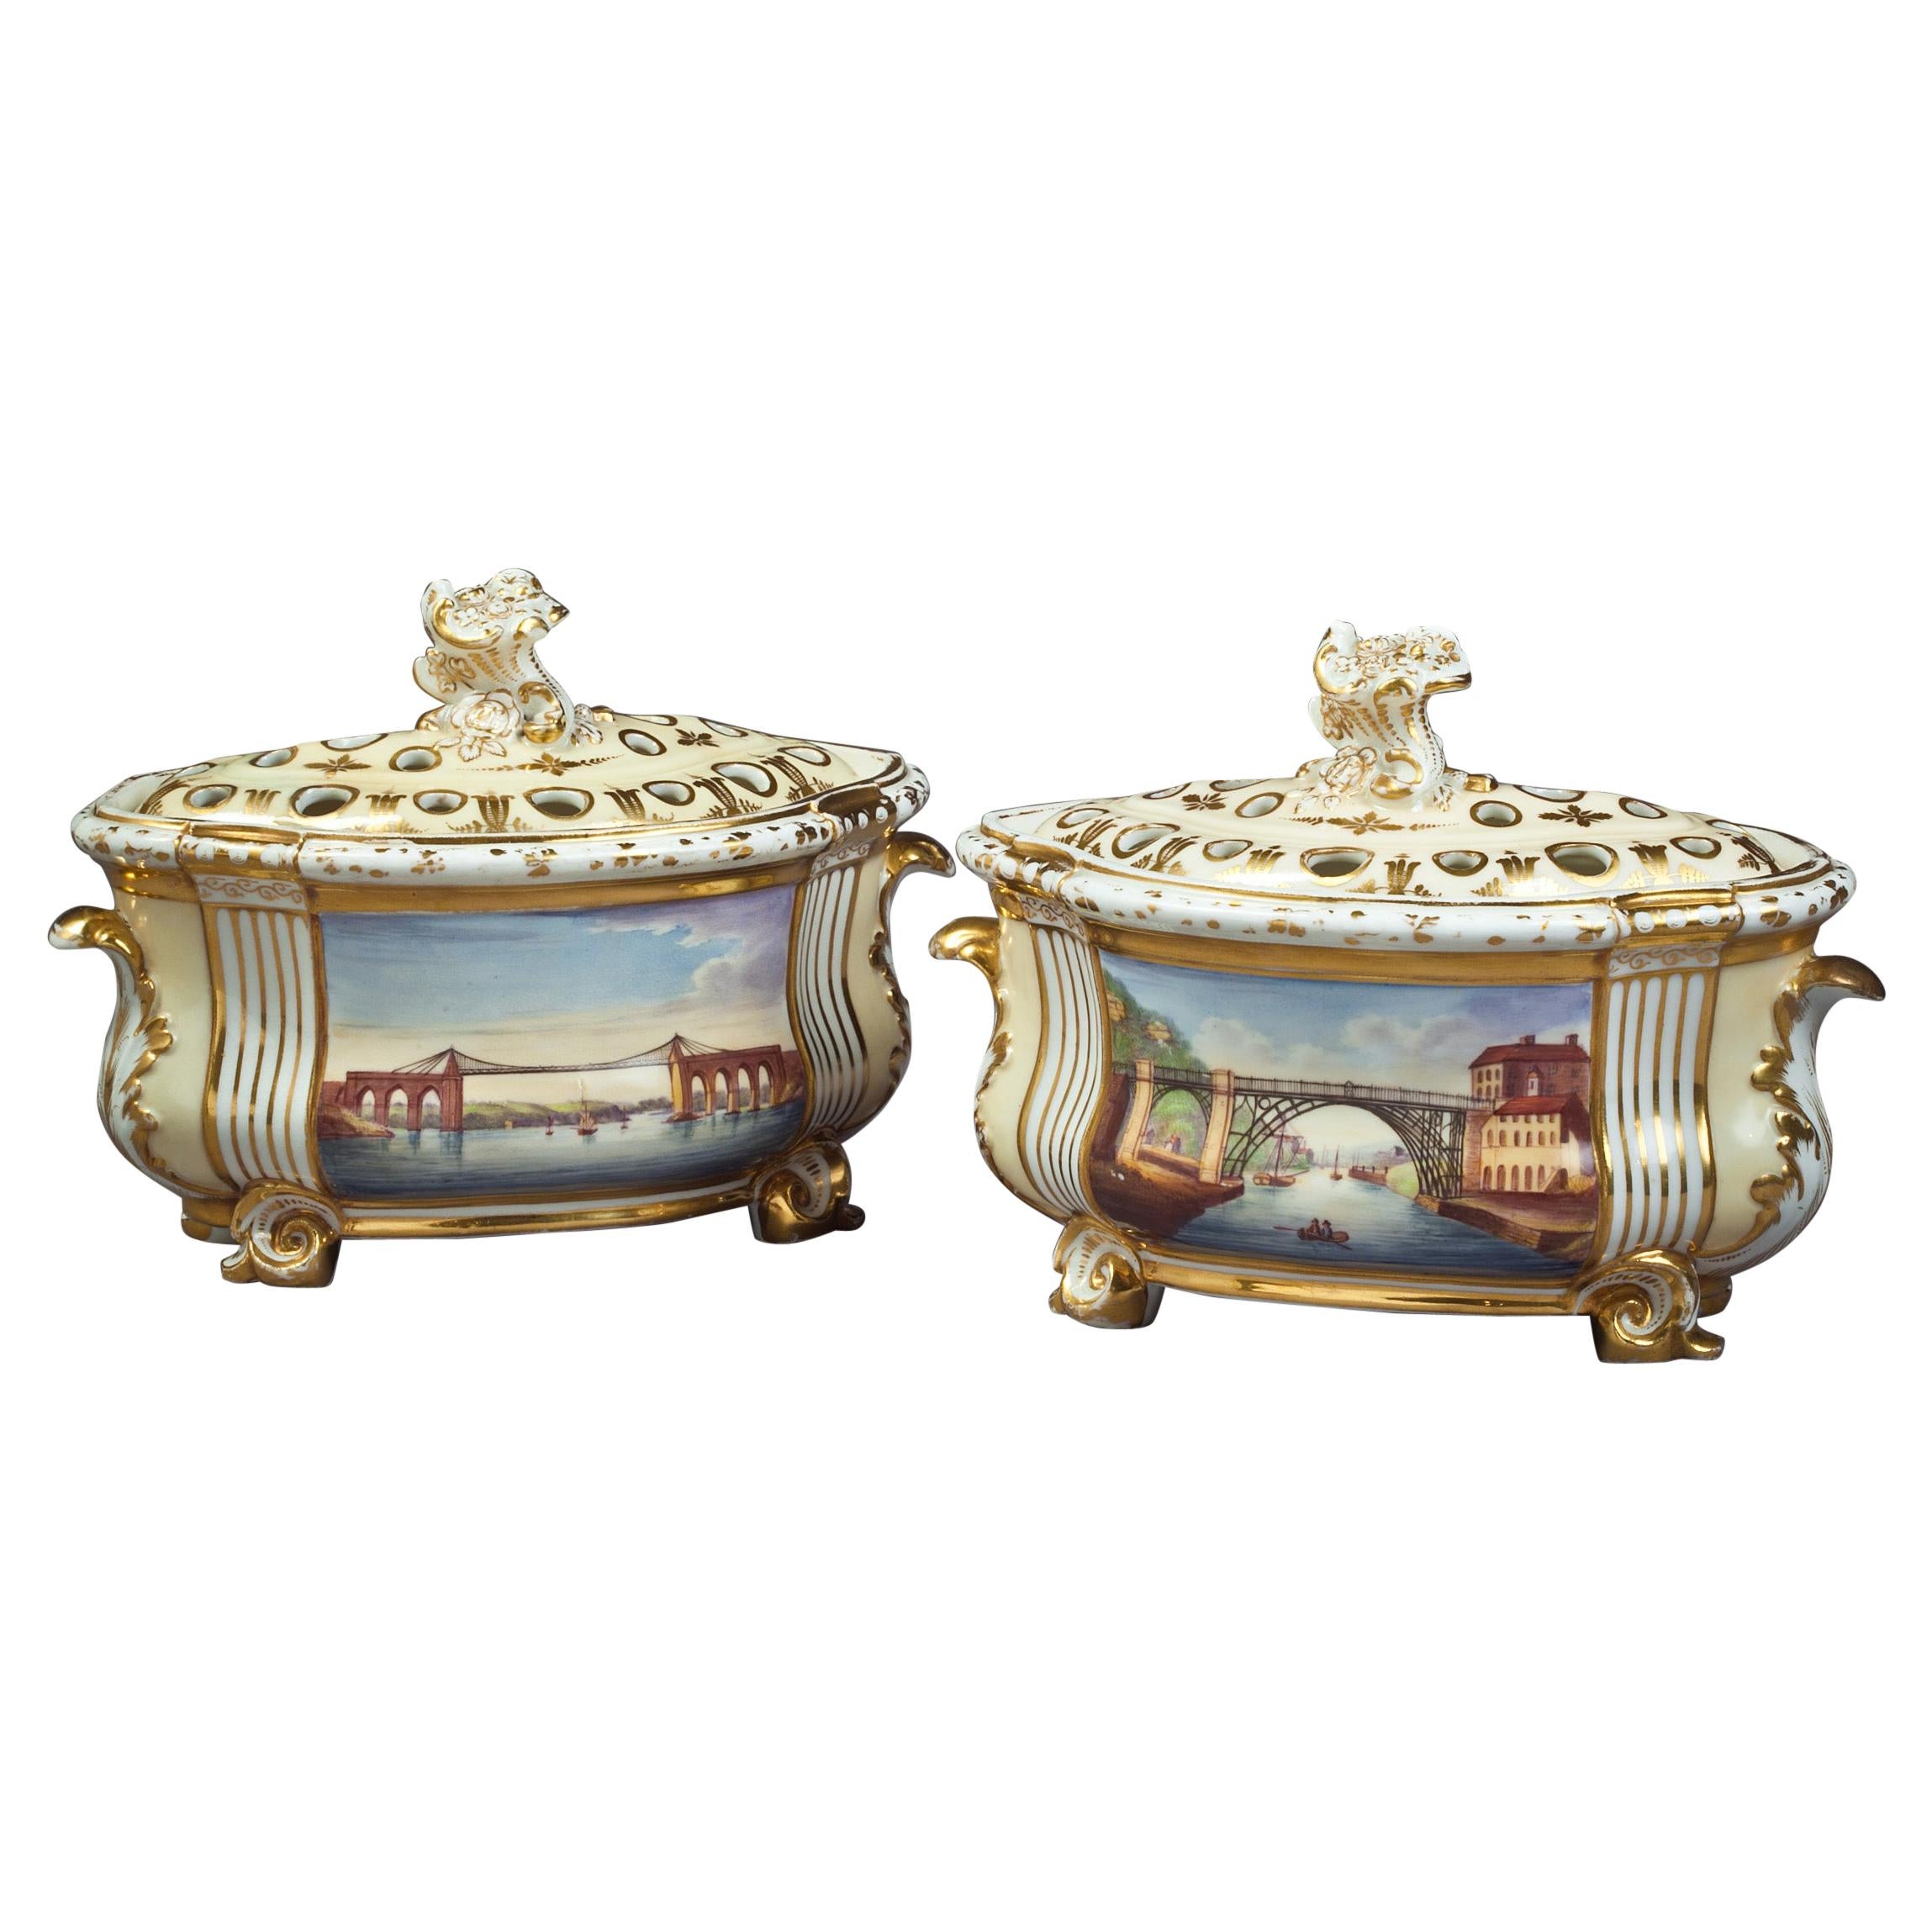 Pair of Rare English Porcelain Covered Cachepots, Derby, circa 1820